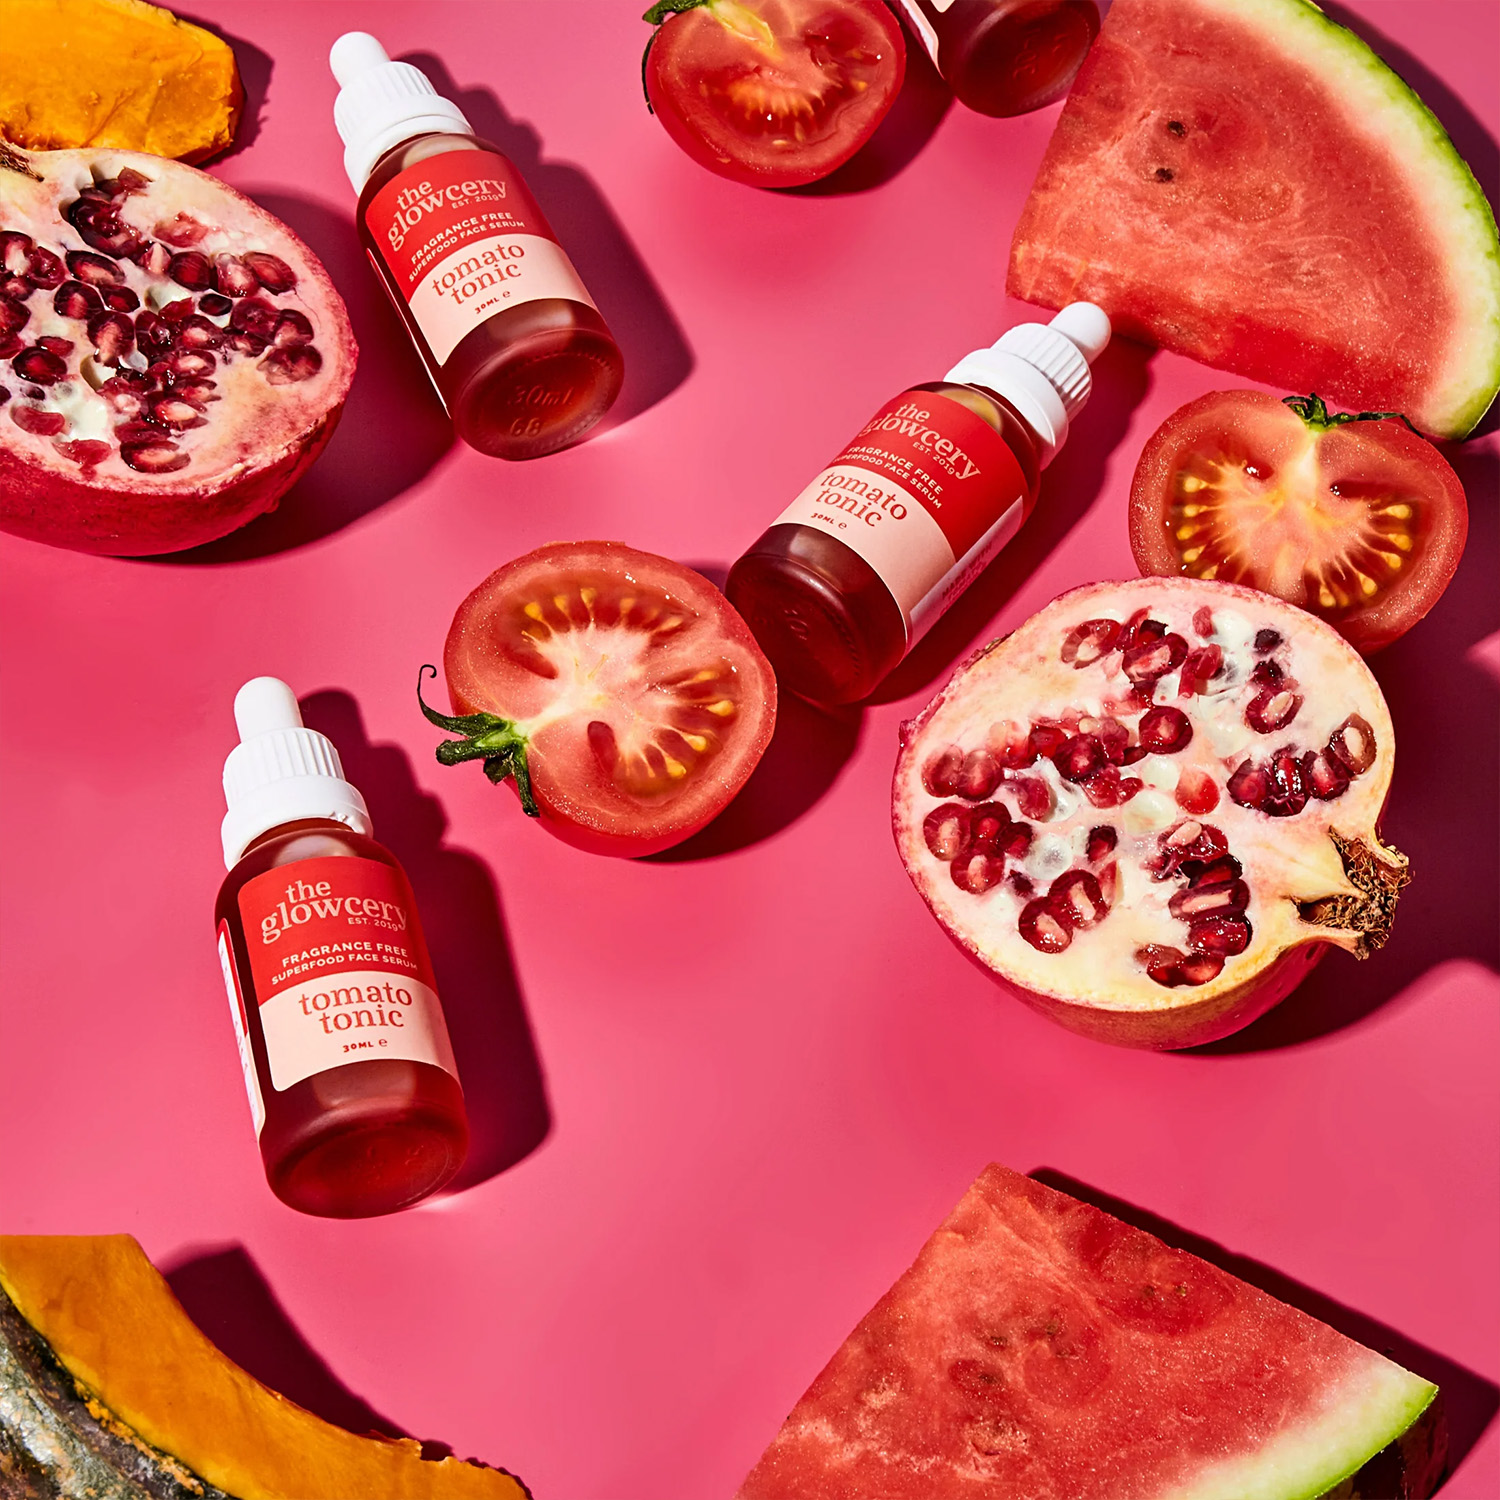 The Glowcery Shop products with pomegranate and watermelon